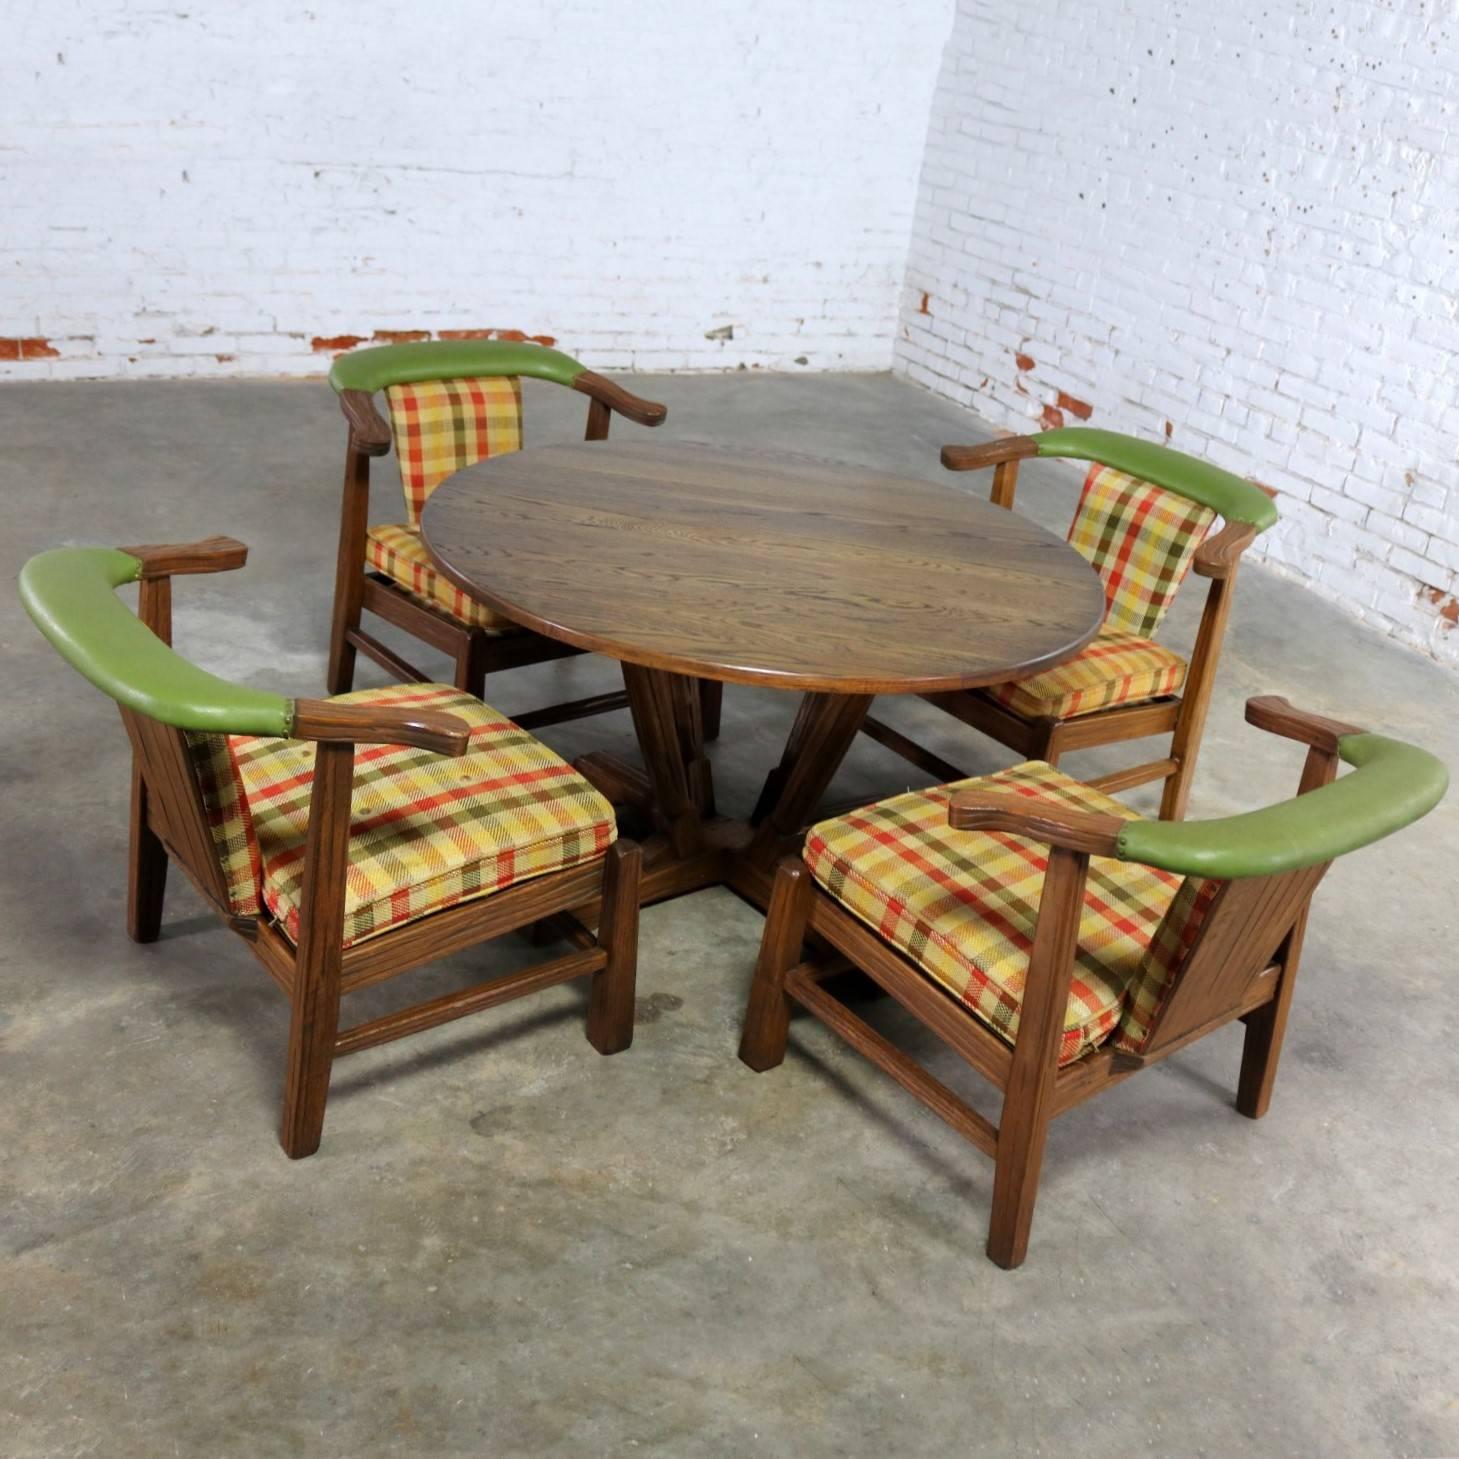 Handsome and unique game table and four chairs by A. Brandt Company from their Ranch Oak collection called the Brunch Table model #2906. This table and chair set is in wonderful vintage condition with their original wood finish and plaid upholstery.